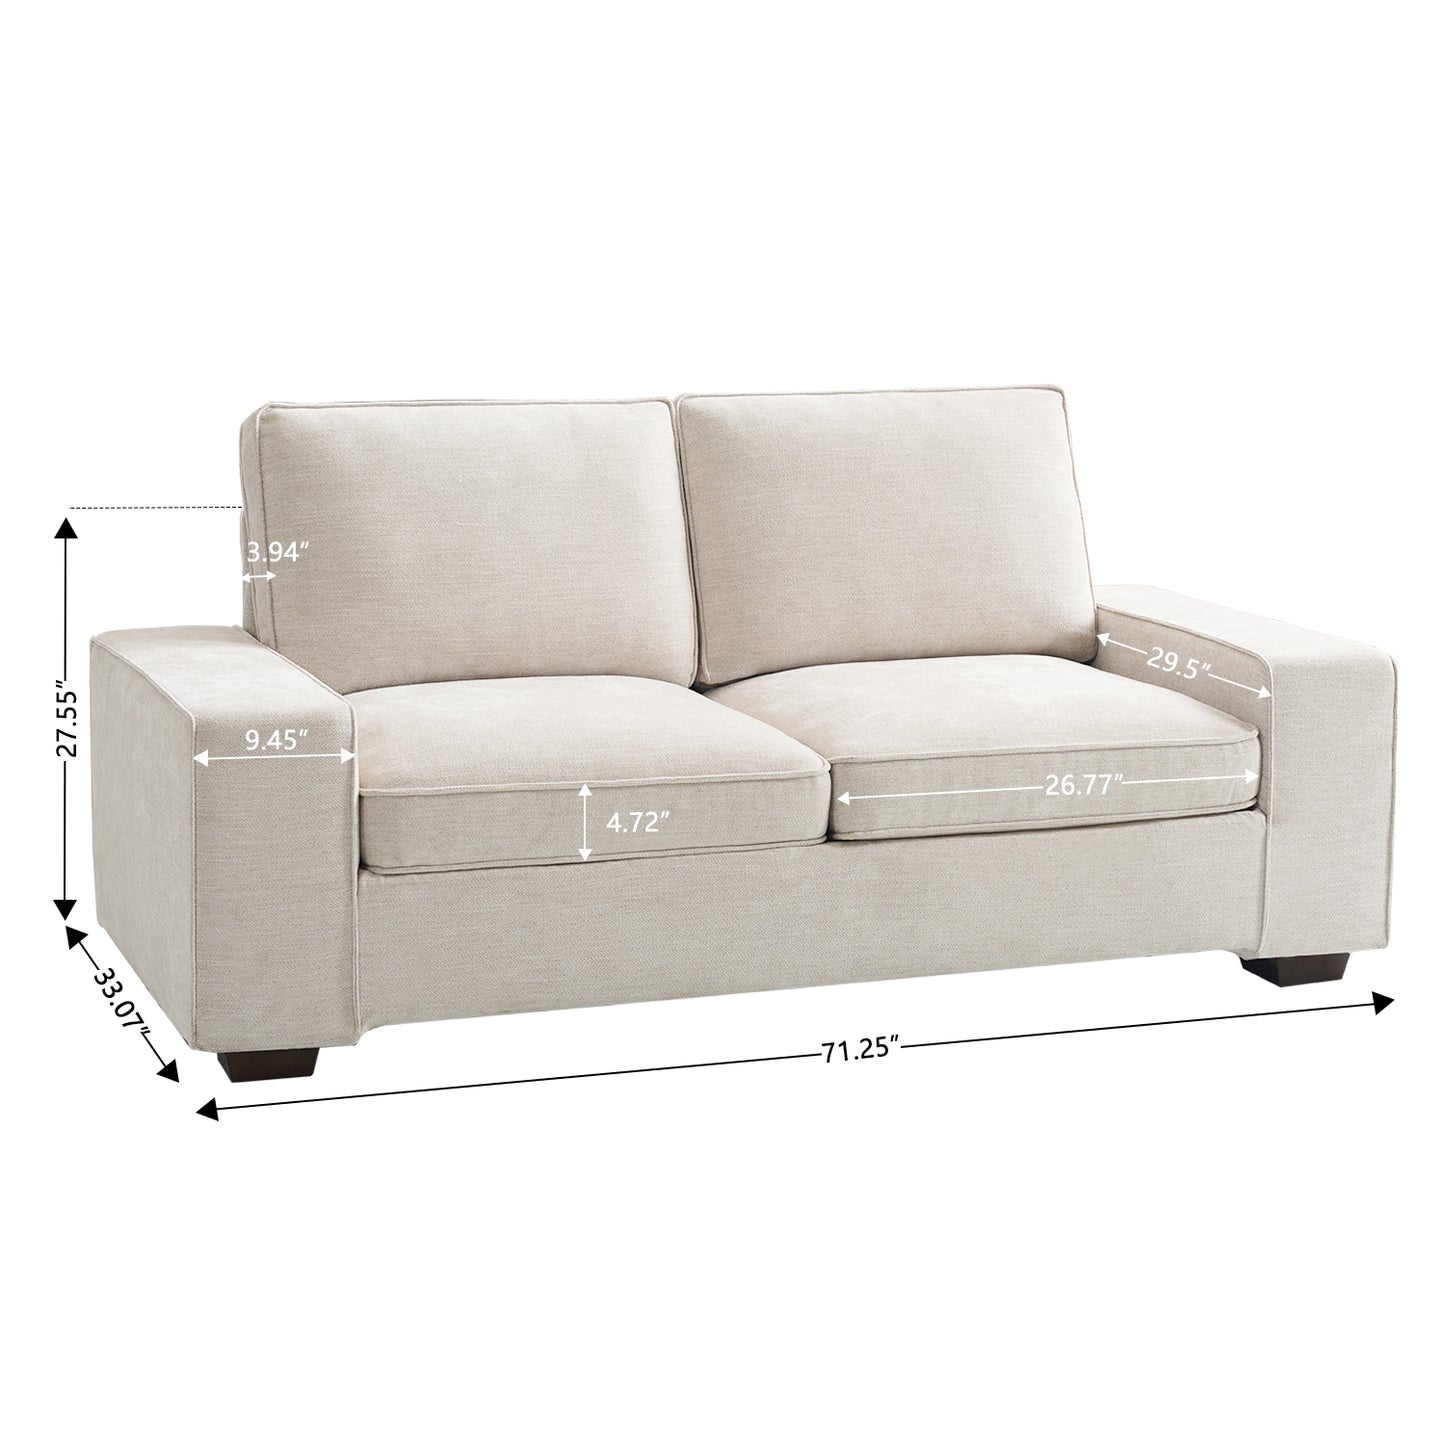 3-Seat Sofa 88.58",Soft and Comfortable,Apartments Small Sofa, Suitable for Living Room, Bedroom,Removable Back Cushion and Easy toolSuitable